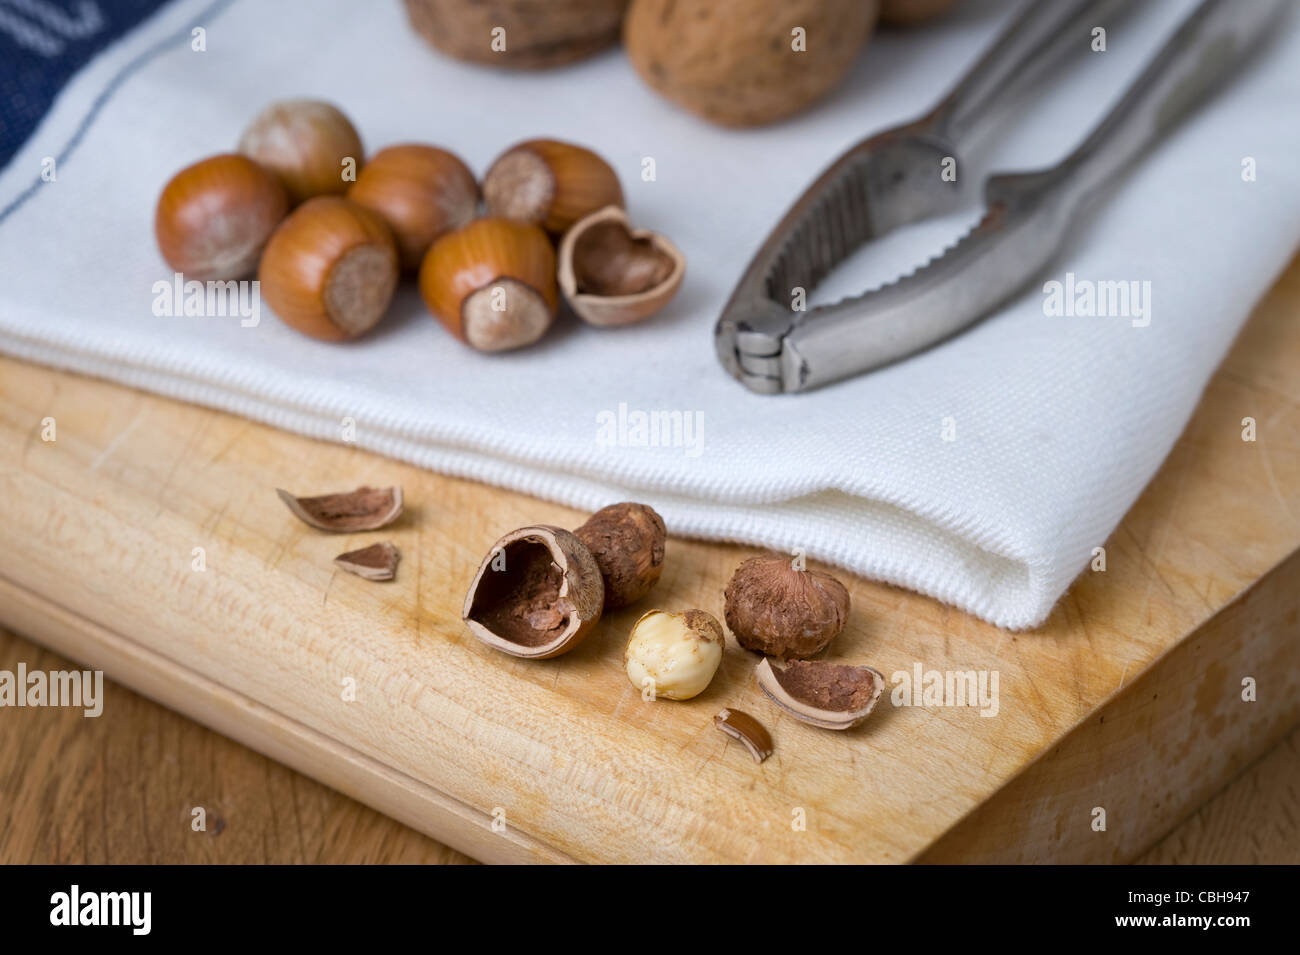 hazel nuts and walnuts on a chopping board with nut crackers and walnuts Stock Photo